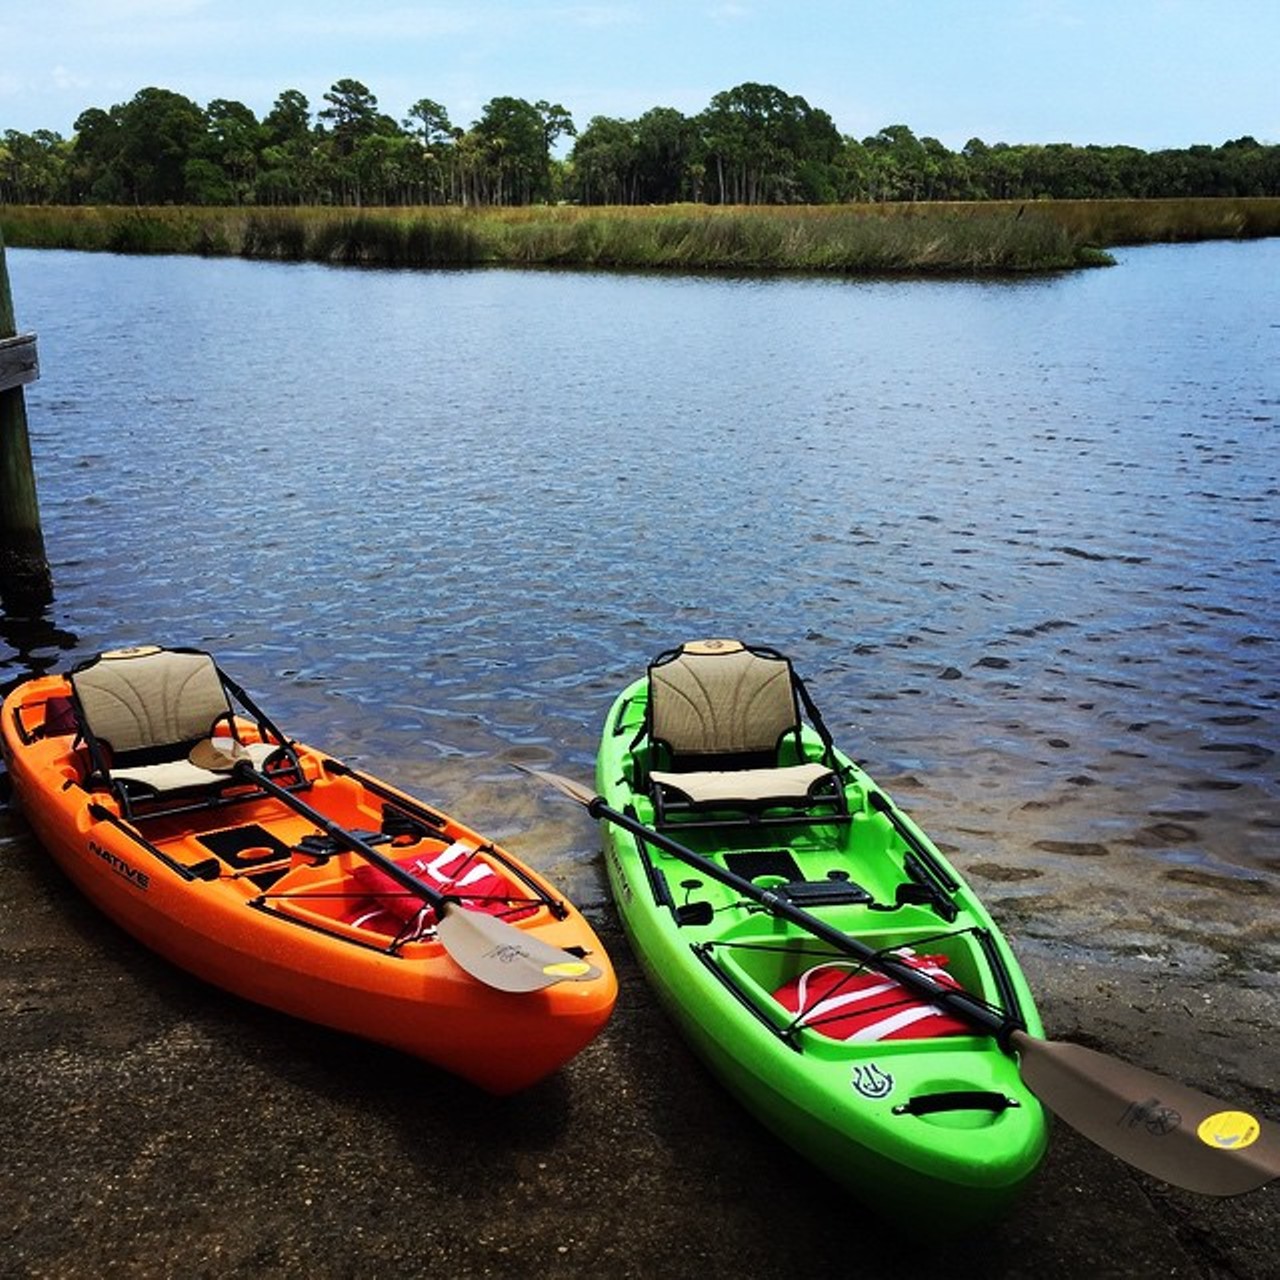 Bulow Creek State Park
3351 Old Dixie Highway, Ormond Beach, Fla. 32174 | 386-676-4050
Hop in a boat and catch yourself a whole bunch of blue crabs for dinner at Bulow Creek. Take a walk down the Bulow Woods Trail which guides campers to the Bulow Plantation Ruins Historic State Park. The plantation burned down during the Second Seminole War in 1836.
Photo via 2b_curly on Instagram